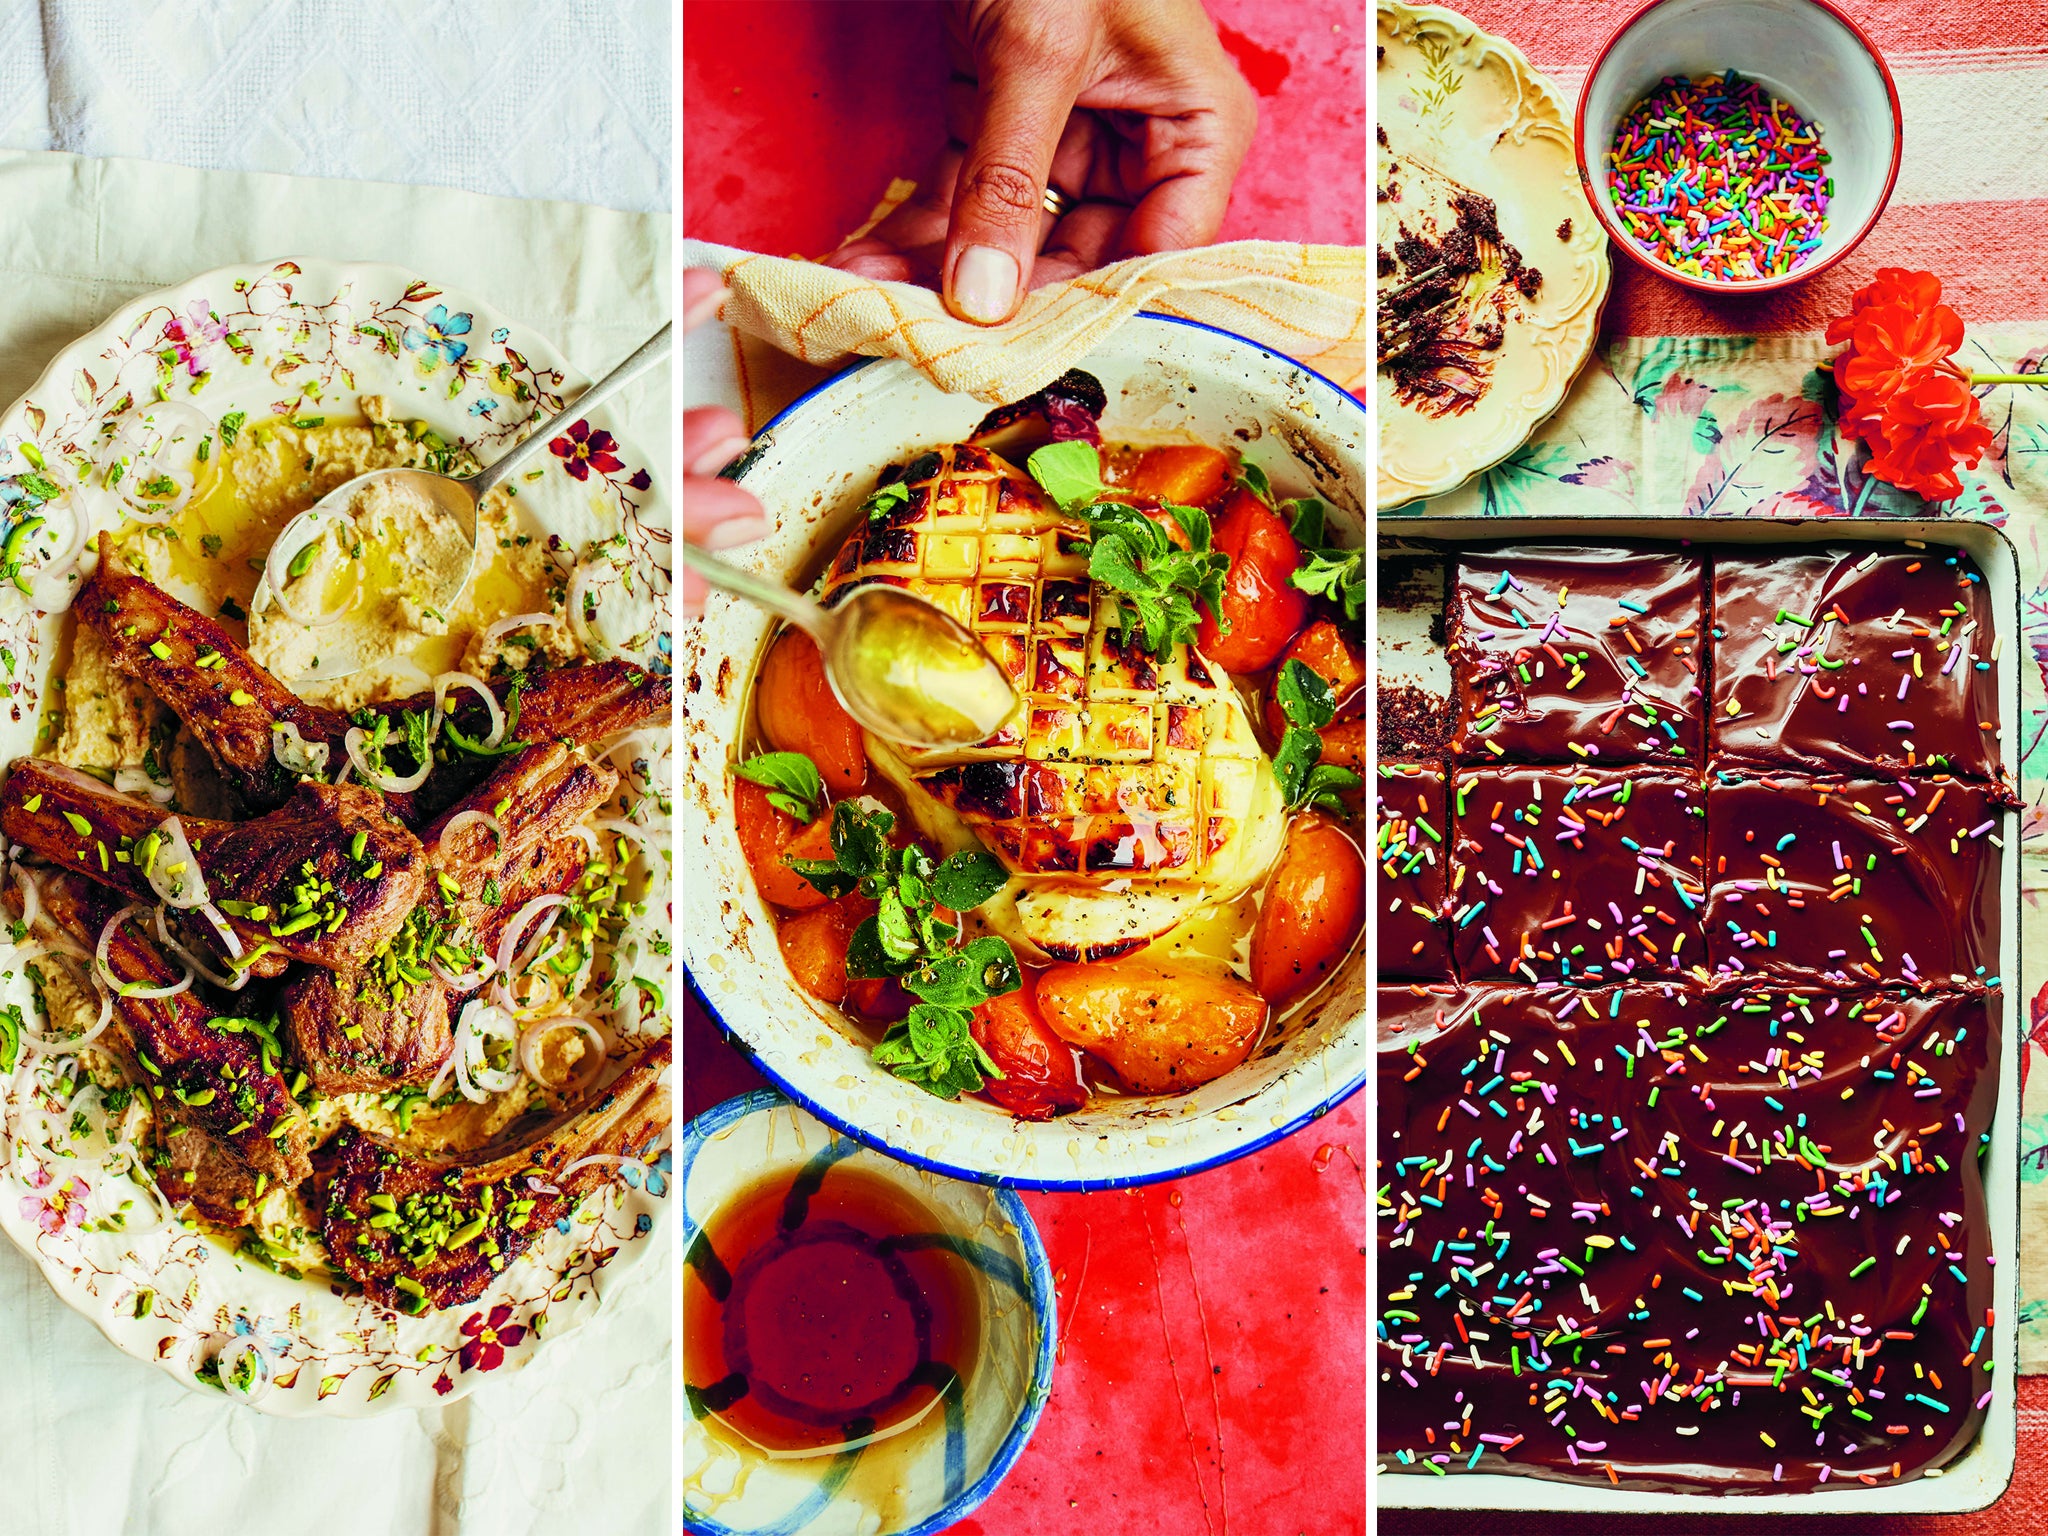 Greek Cypriot cook Georgina Hayden grew up eating these types of recipes